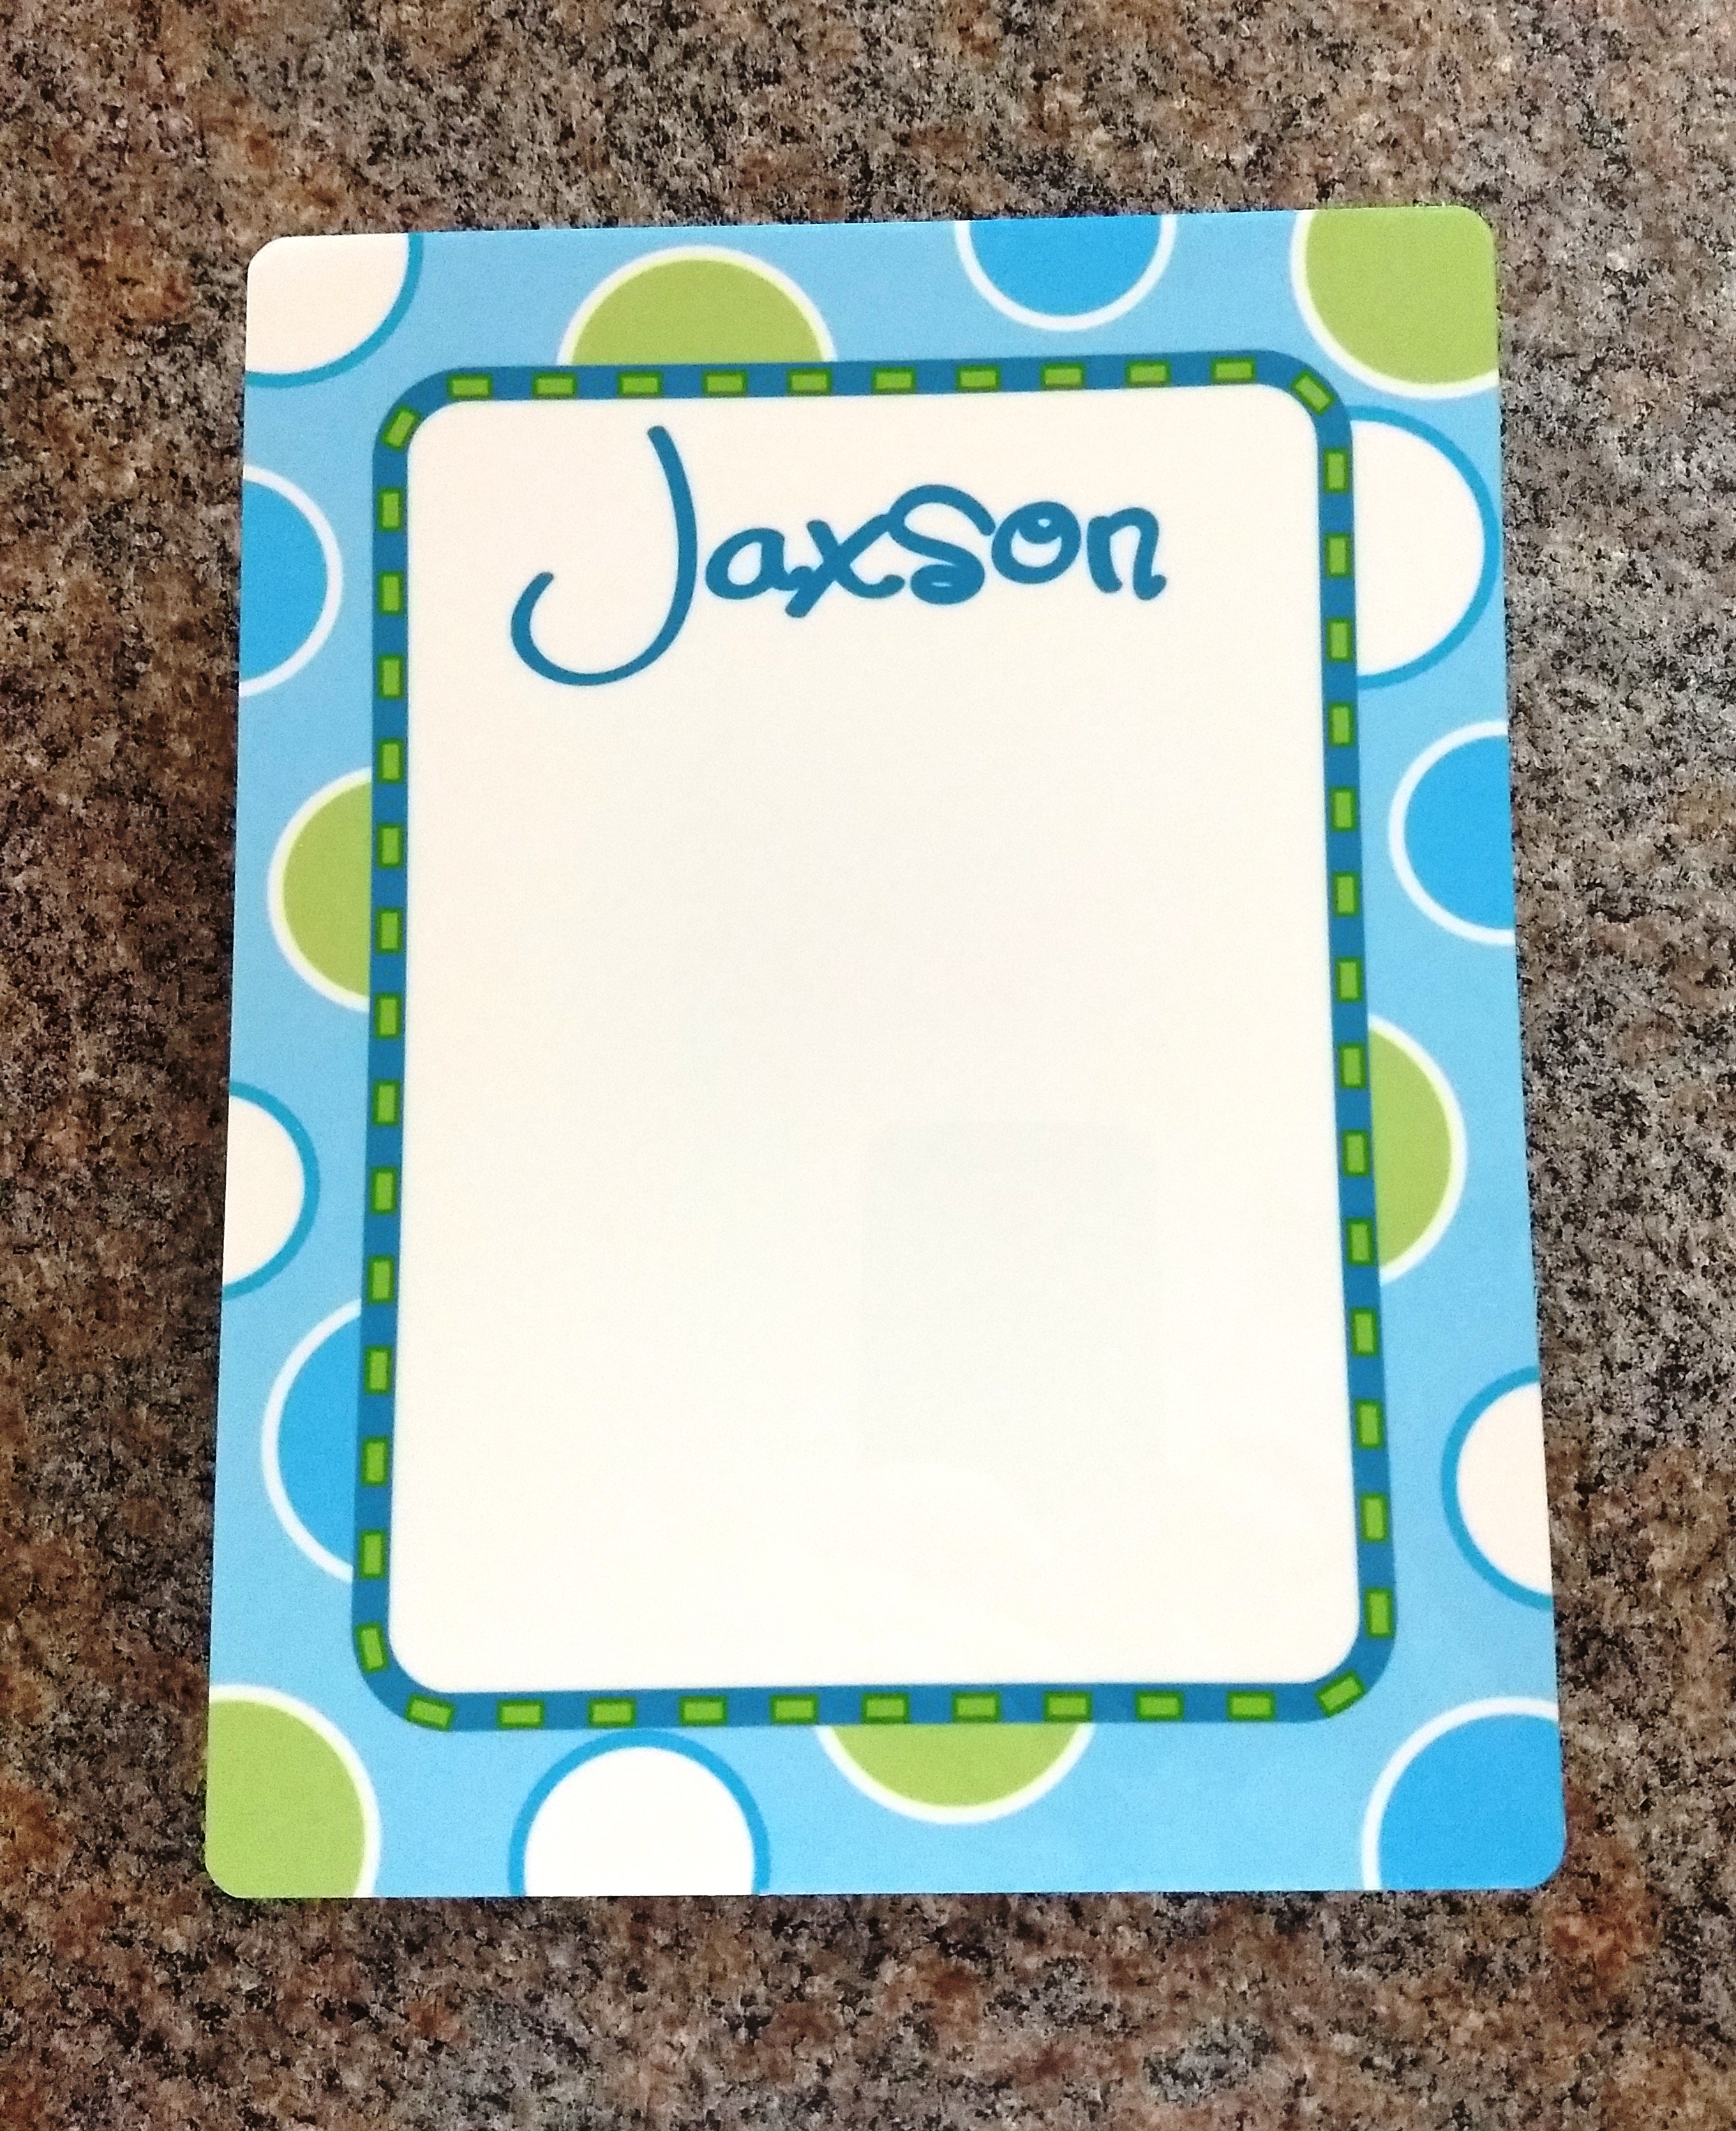 Personalized dry erase board made with sublimation printing